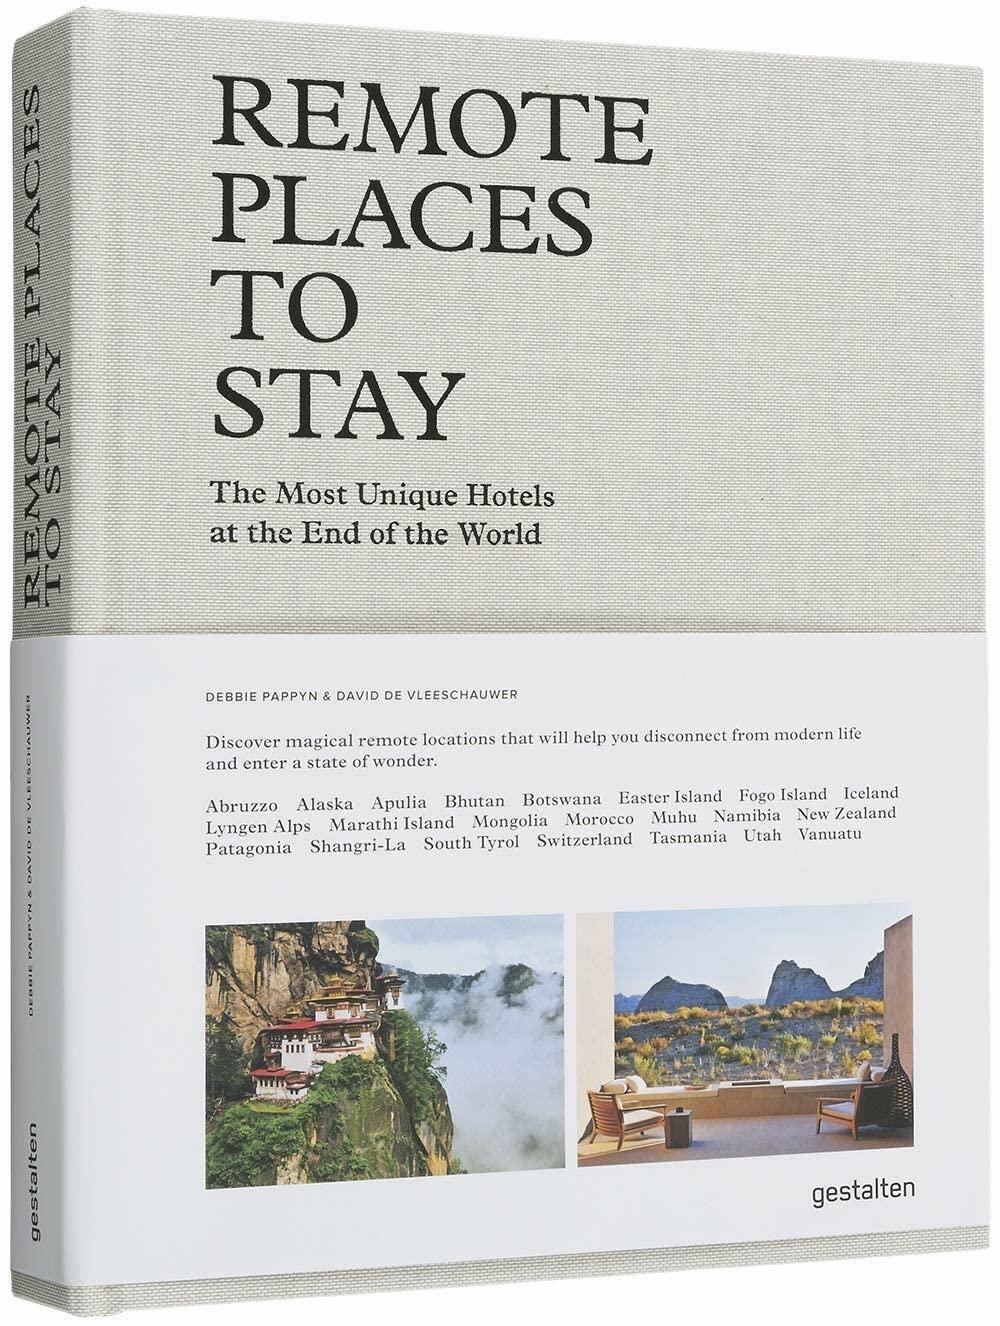 ING Remote places to stay